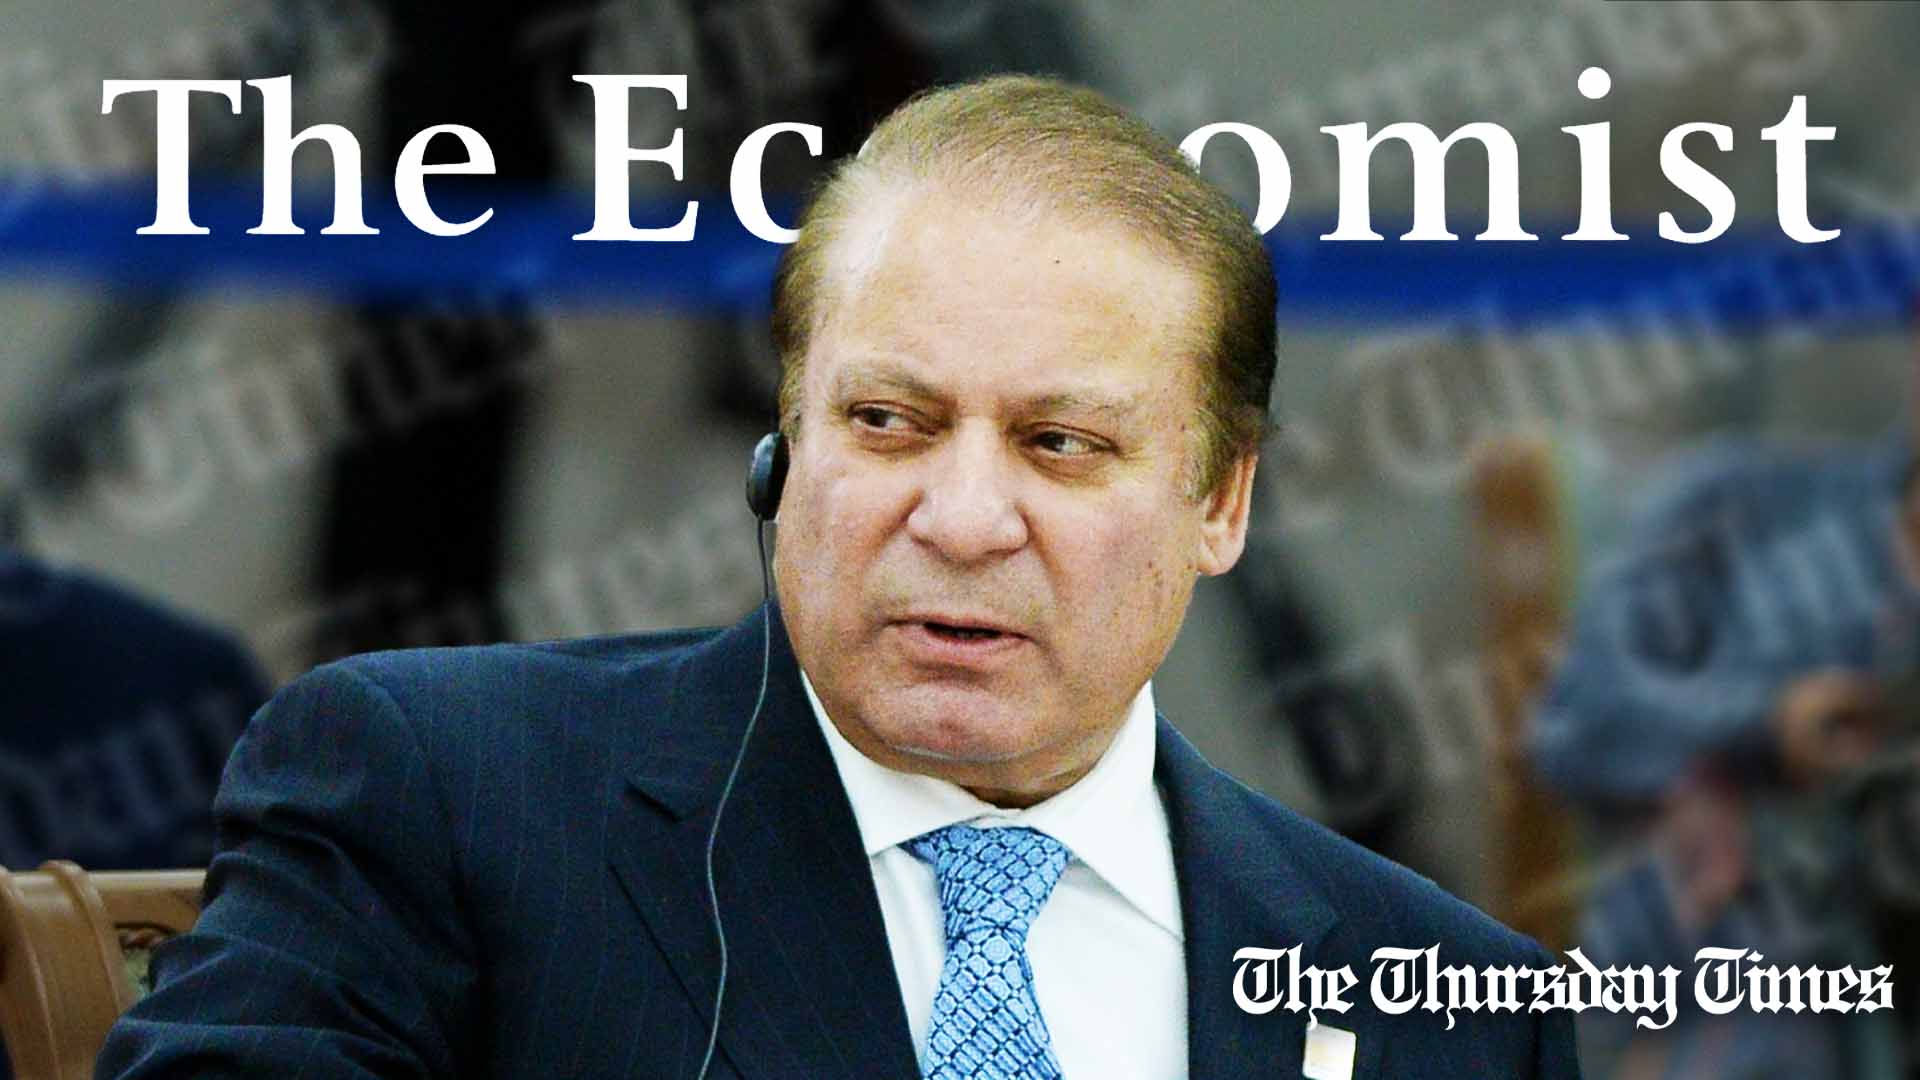 A file photo is shown of PML(N) supremo and former Pakistani prime minister Nawaz Sharif. — FILE/THE THURSDAY TIMES